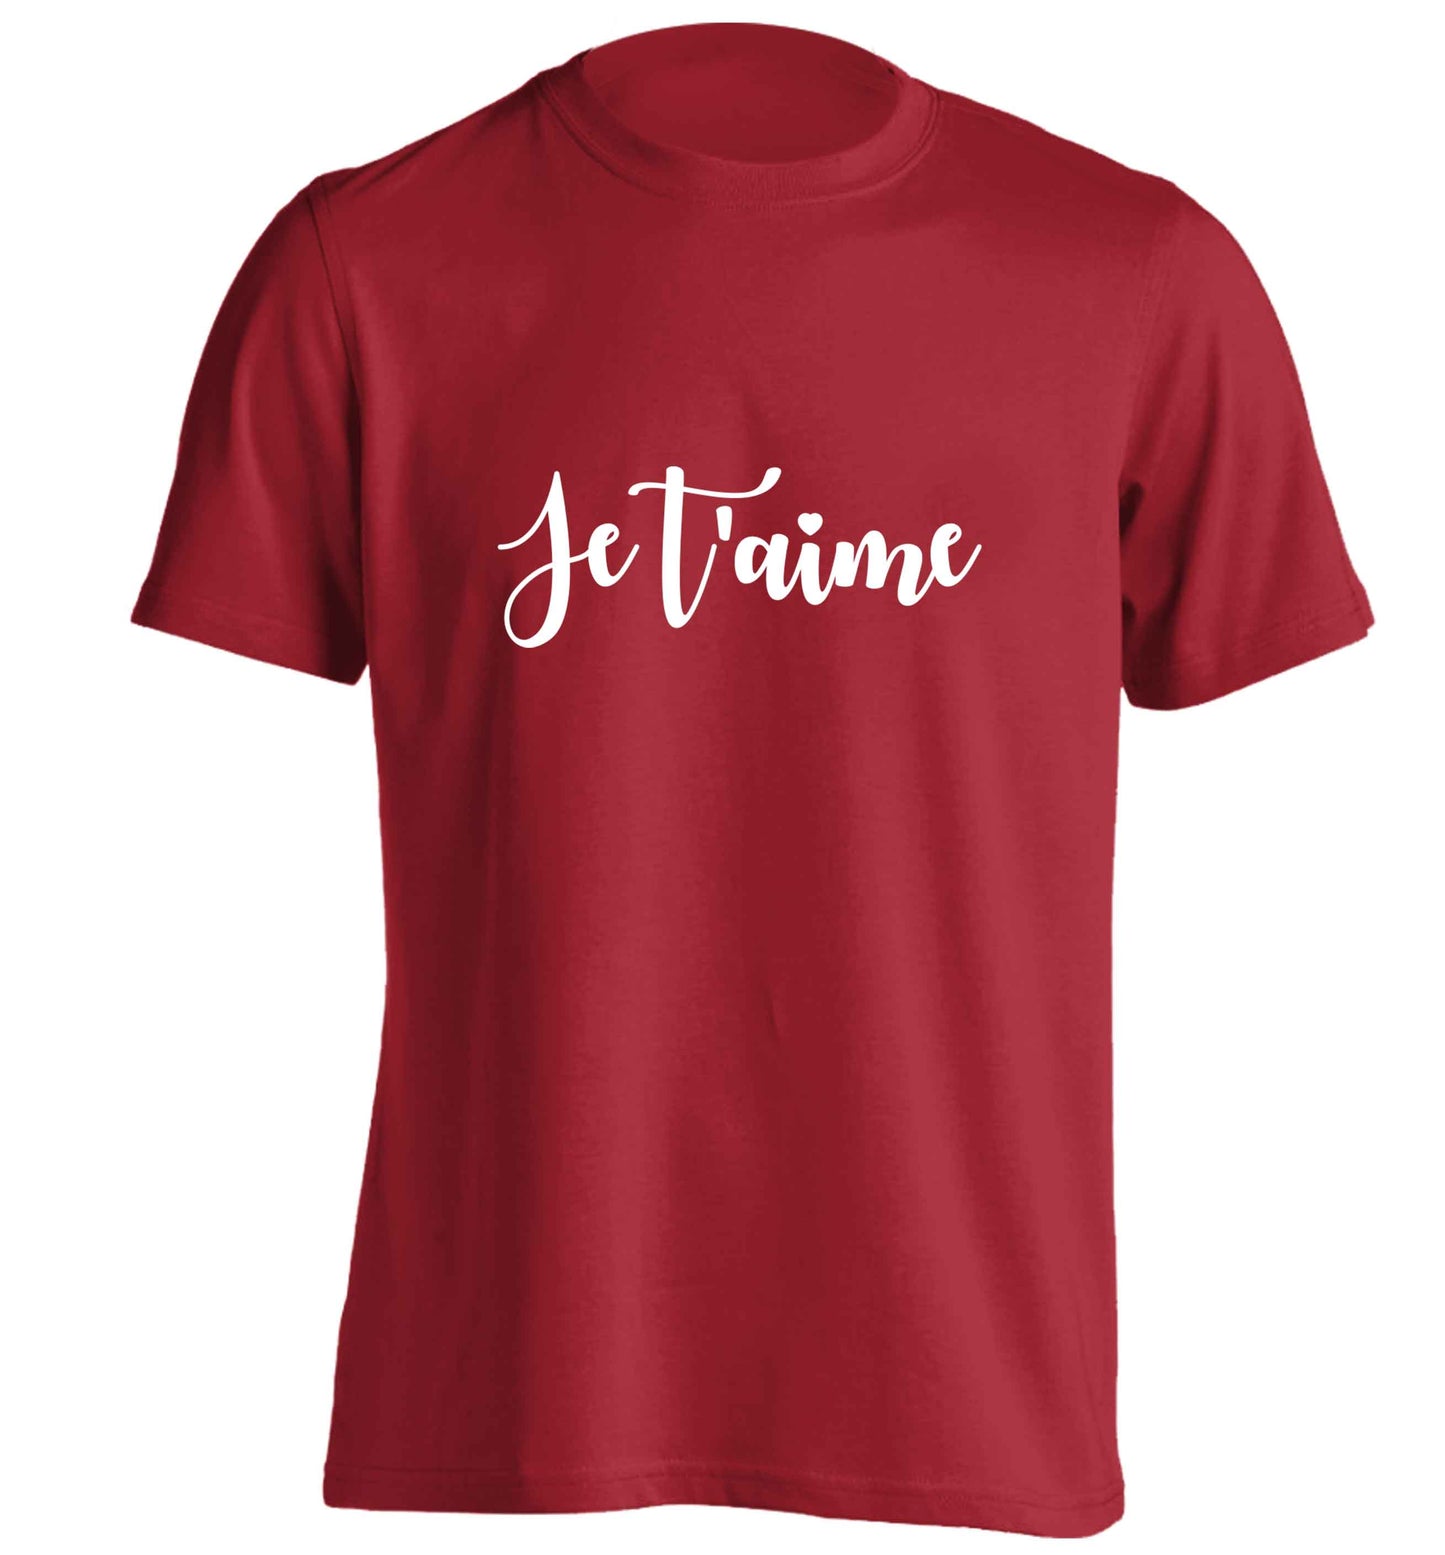 Je t'aime adults unisex red Tshirt 2XL